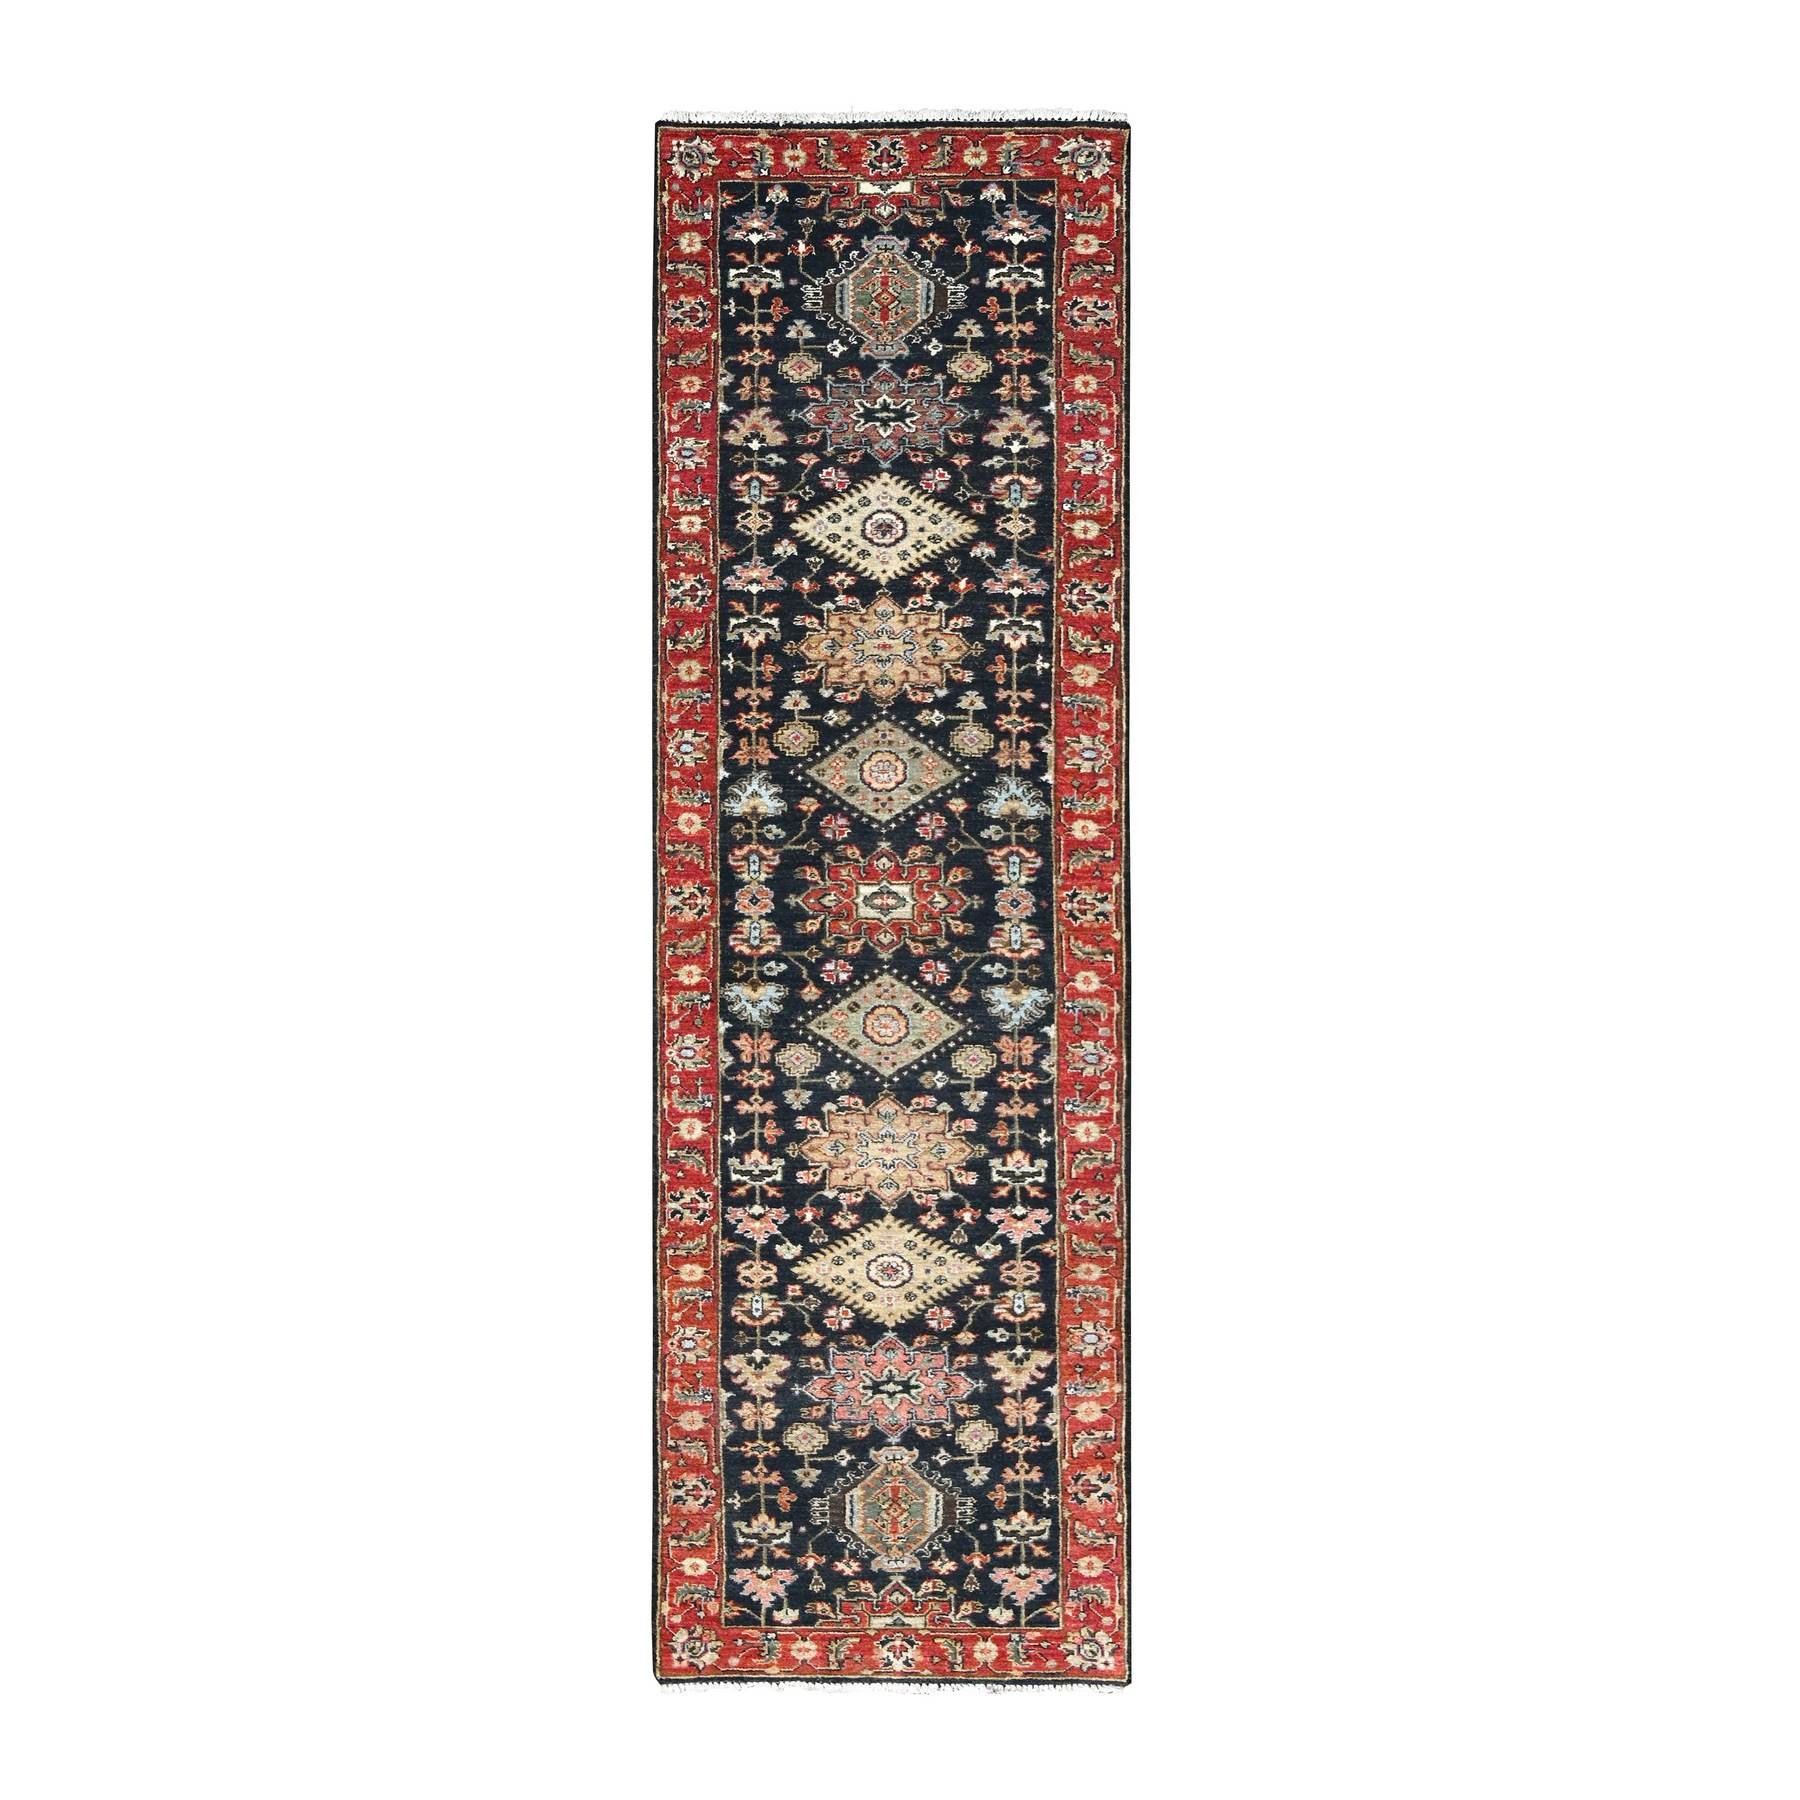 Shahbanu Rugs Denim Blue with Pop of Color Hand Knotted Anatolian Village  Inspired Geometric Design Wool Runner Rug (3'x11'9